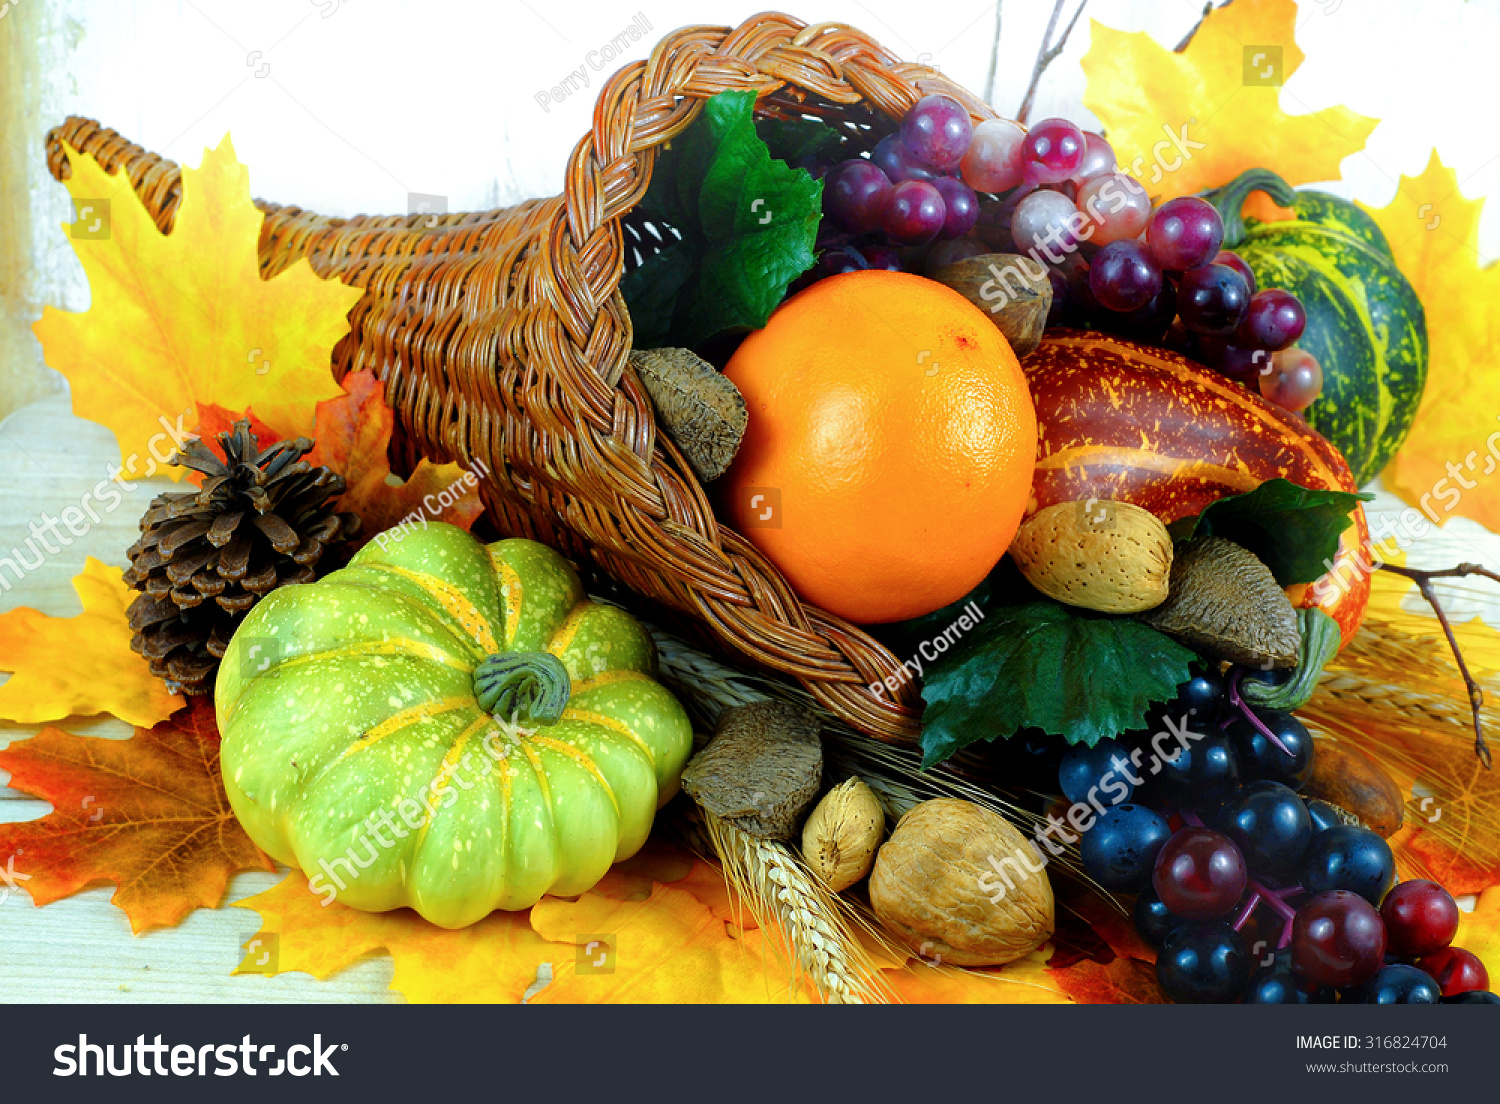 Fall Cornucopia Overflowing With Orange, Grapes, Squashes And Nuts With ...